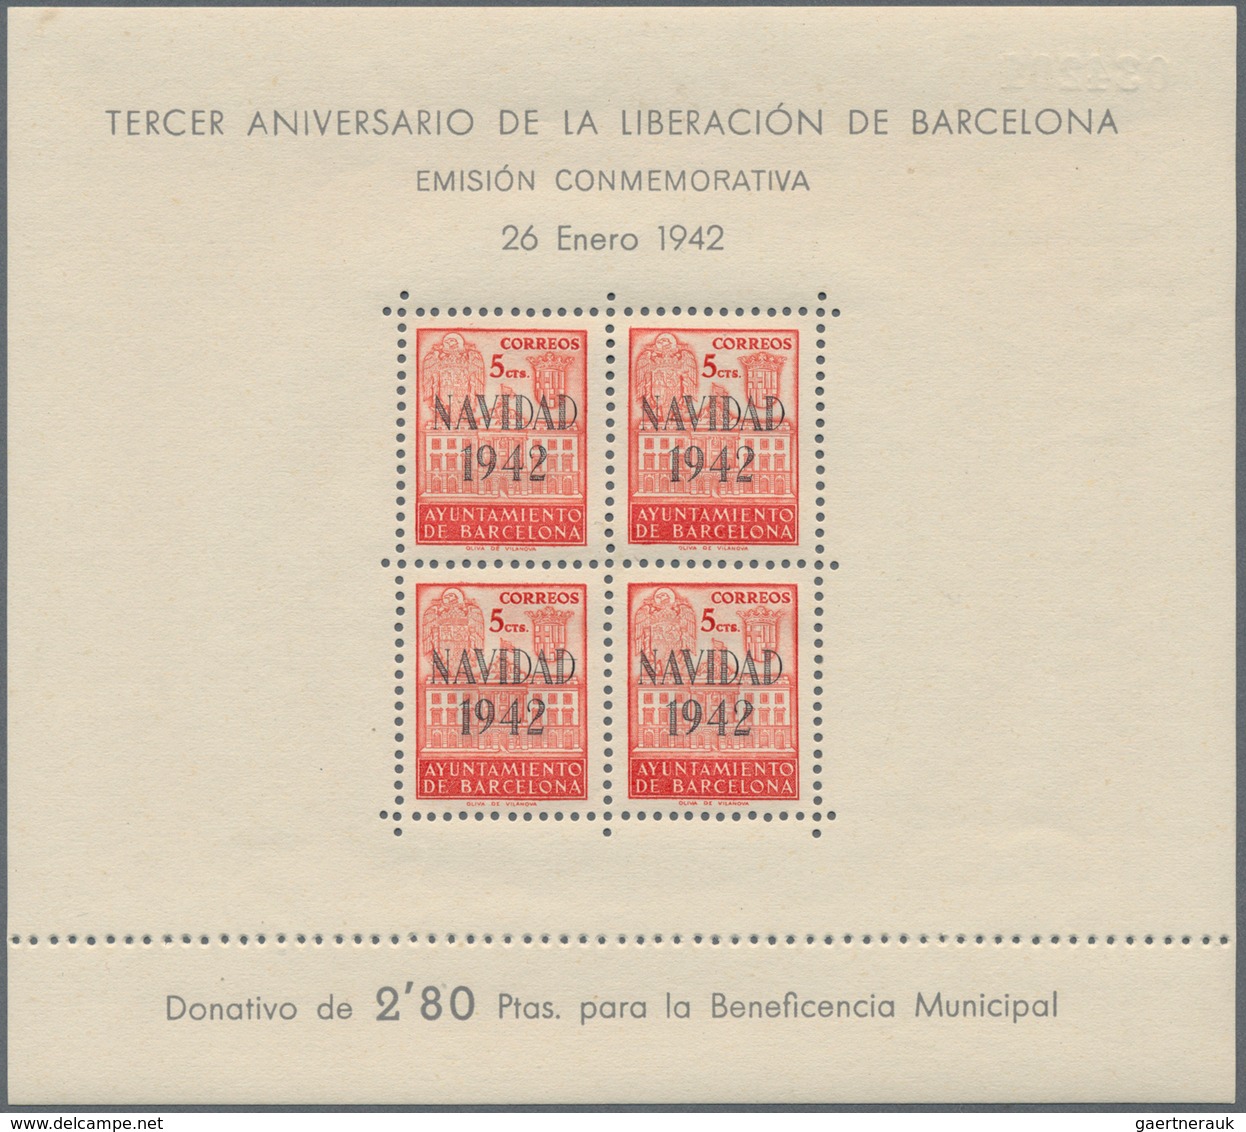 Spanien: 1890/1965 (ca.), duplicates mostly on stockcards in large box with several valuable stamps